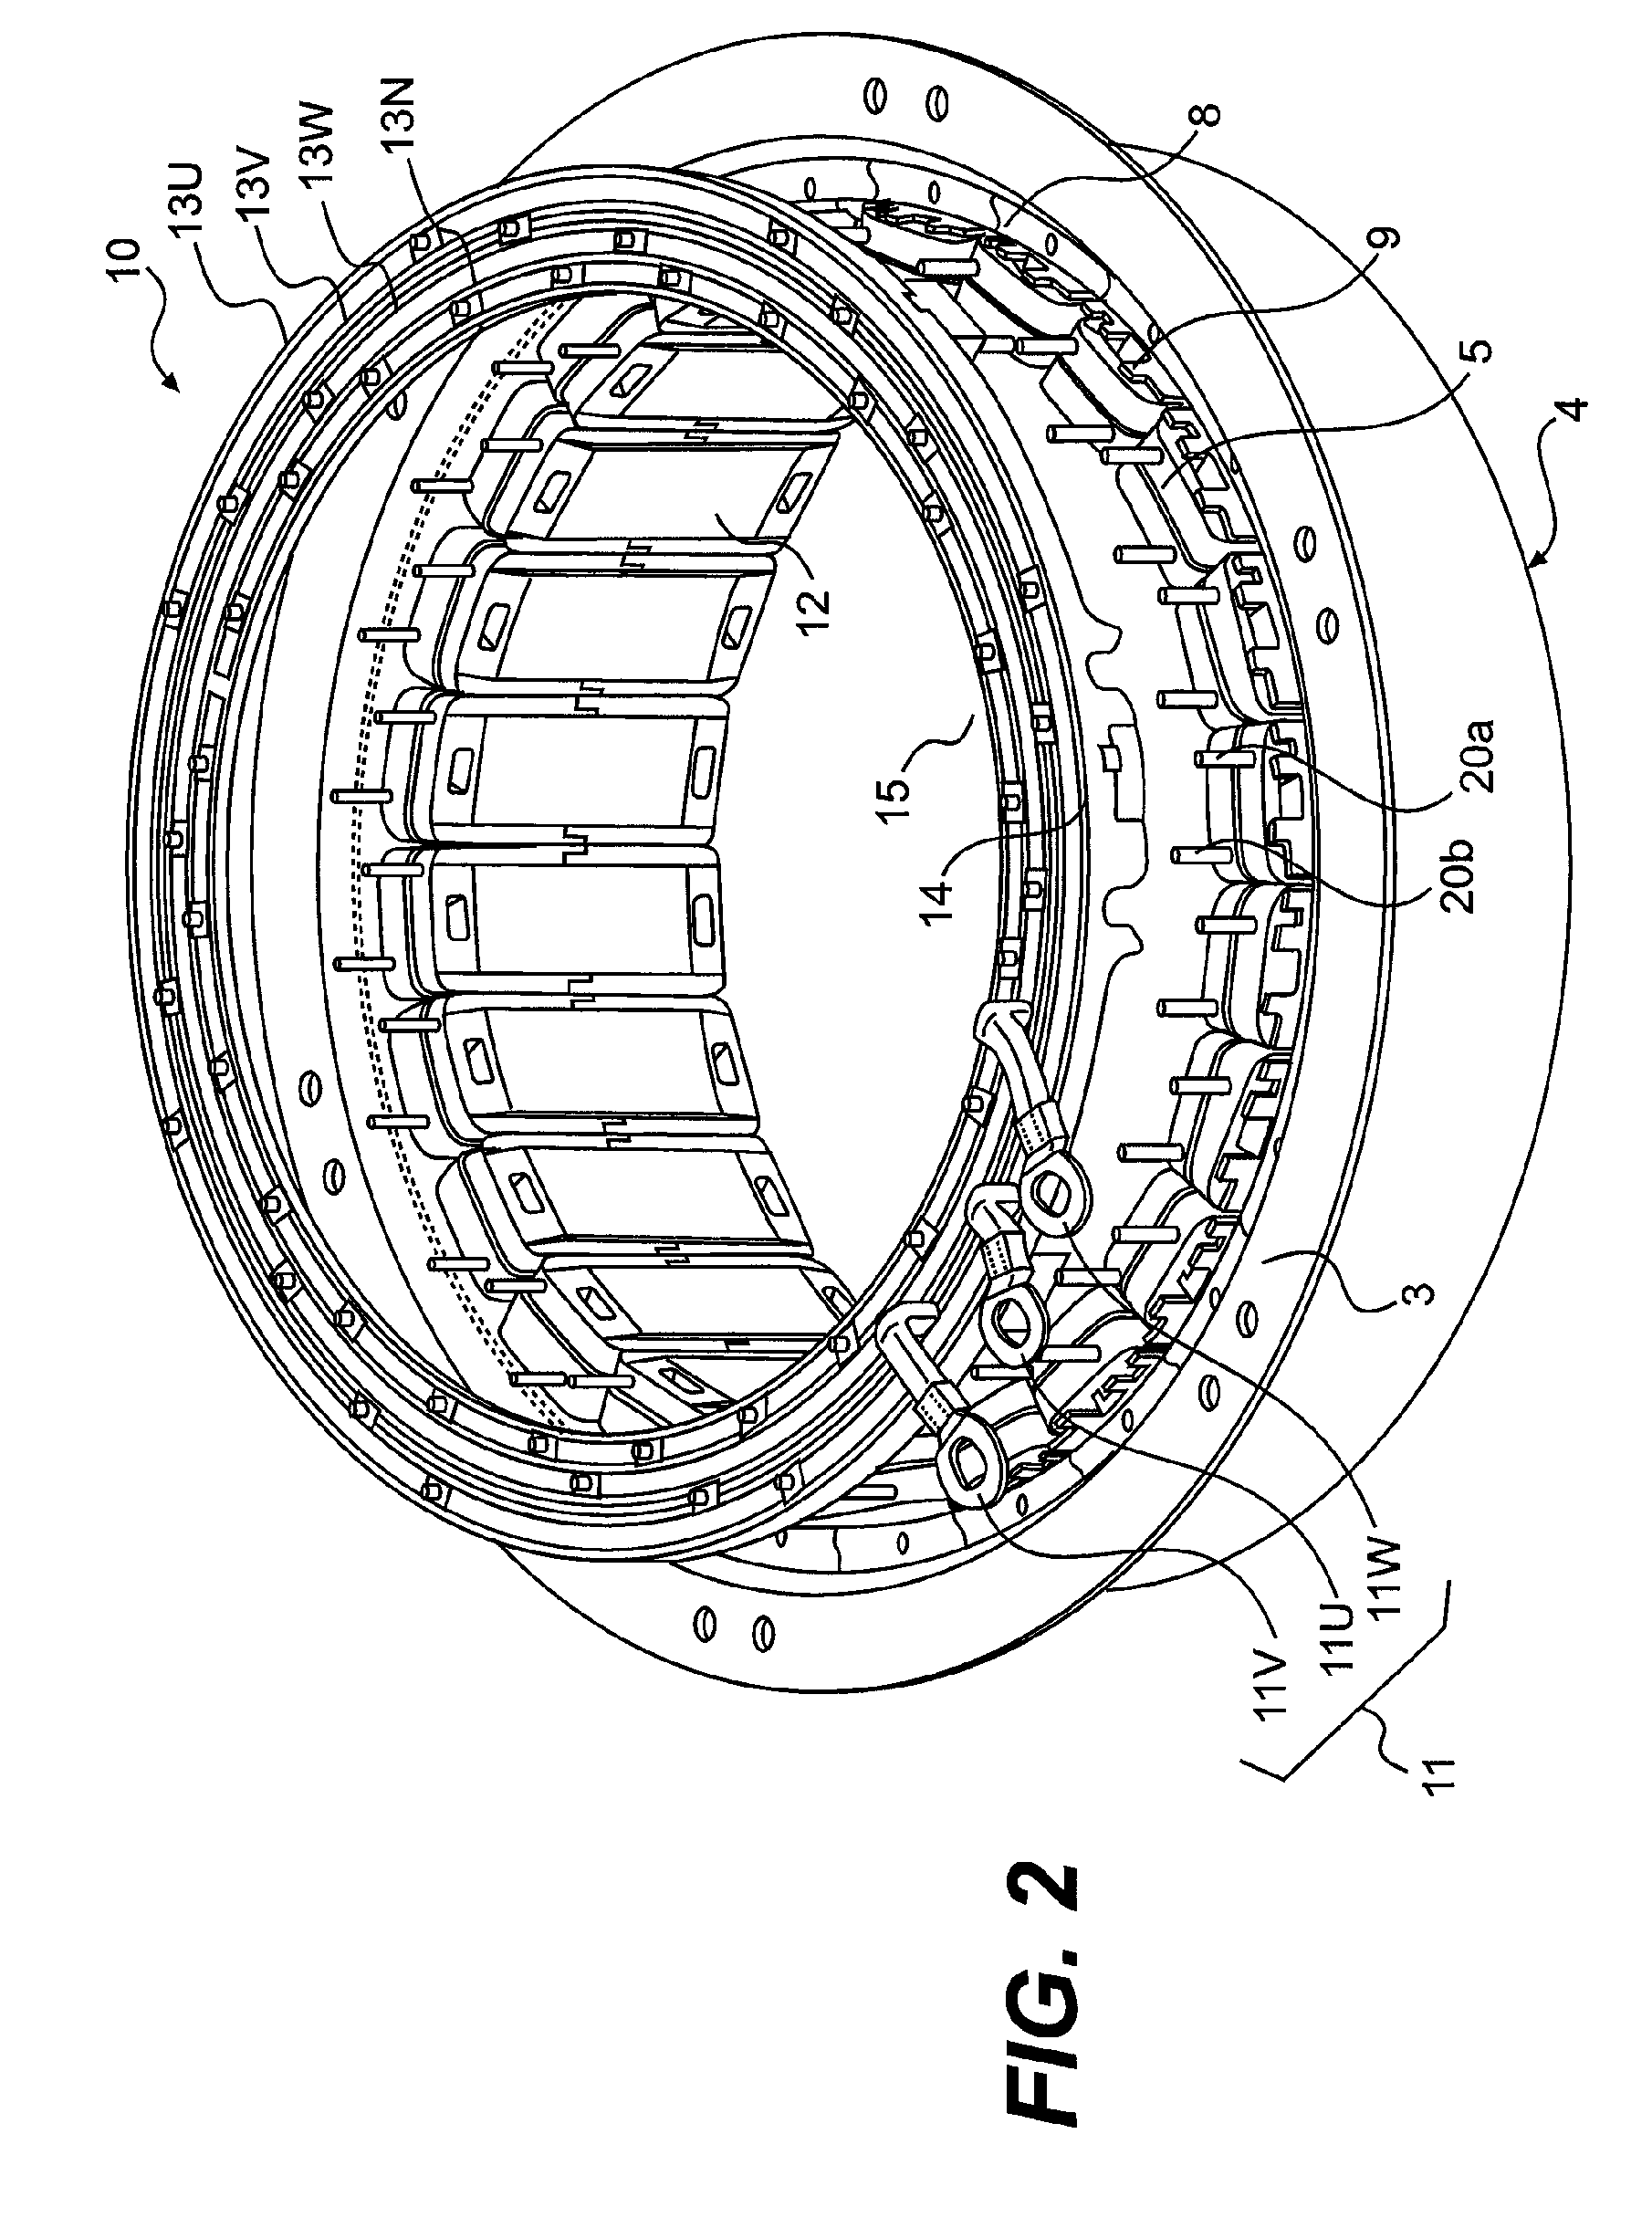 Power distribution unit for rotary electric machine with linear conductor connecting ring having terminal section with axially extending hole for connecting stator coil, and method for assembling rotary electric machine